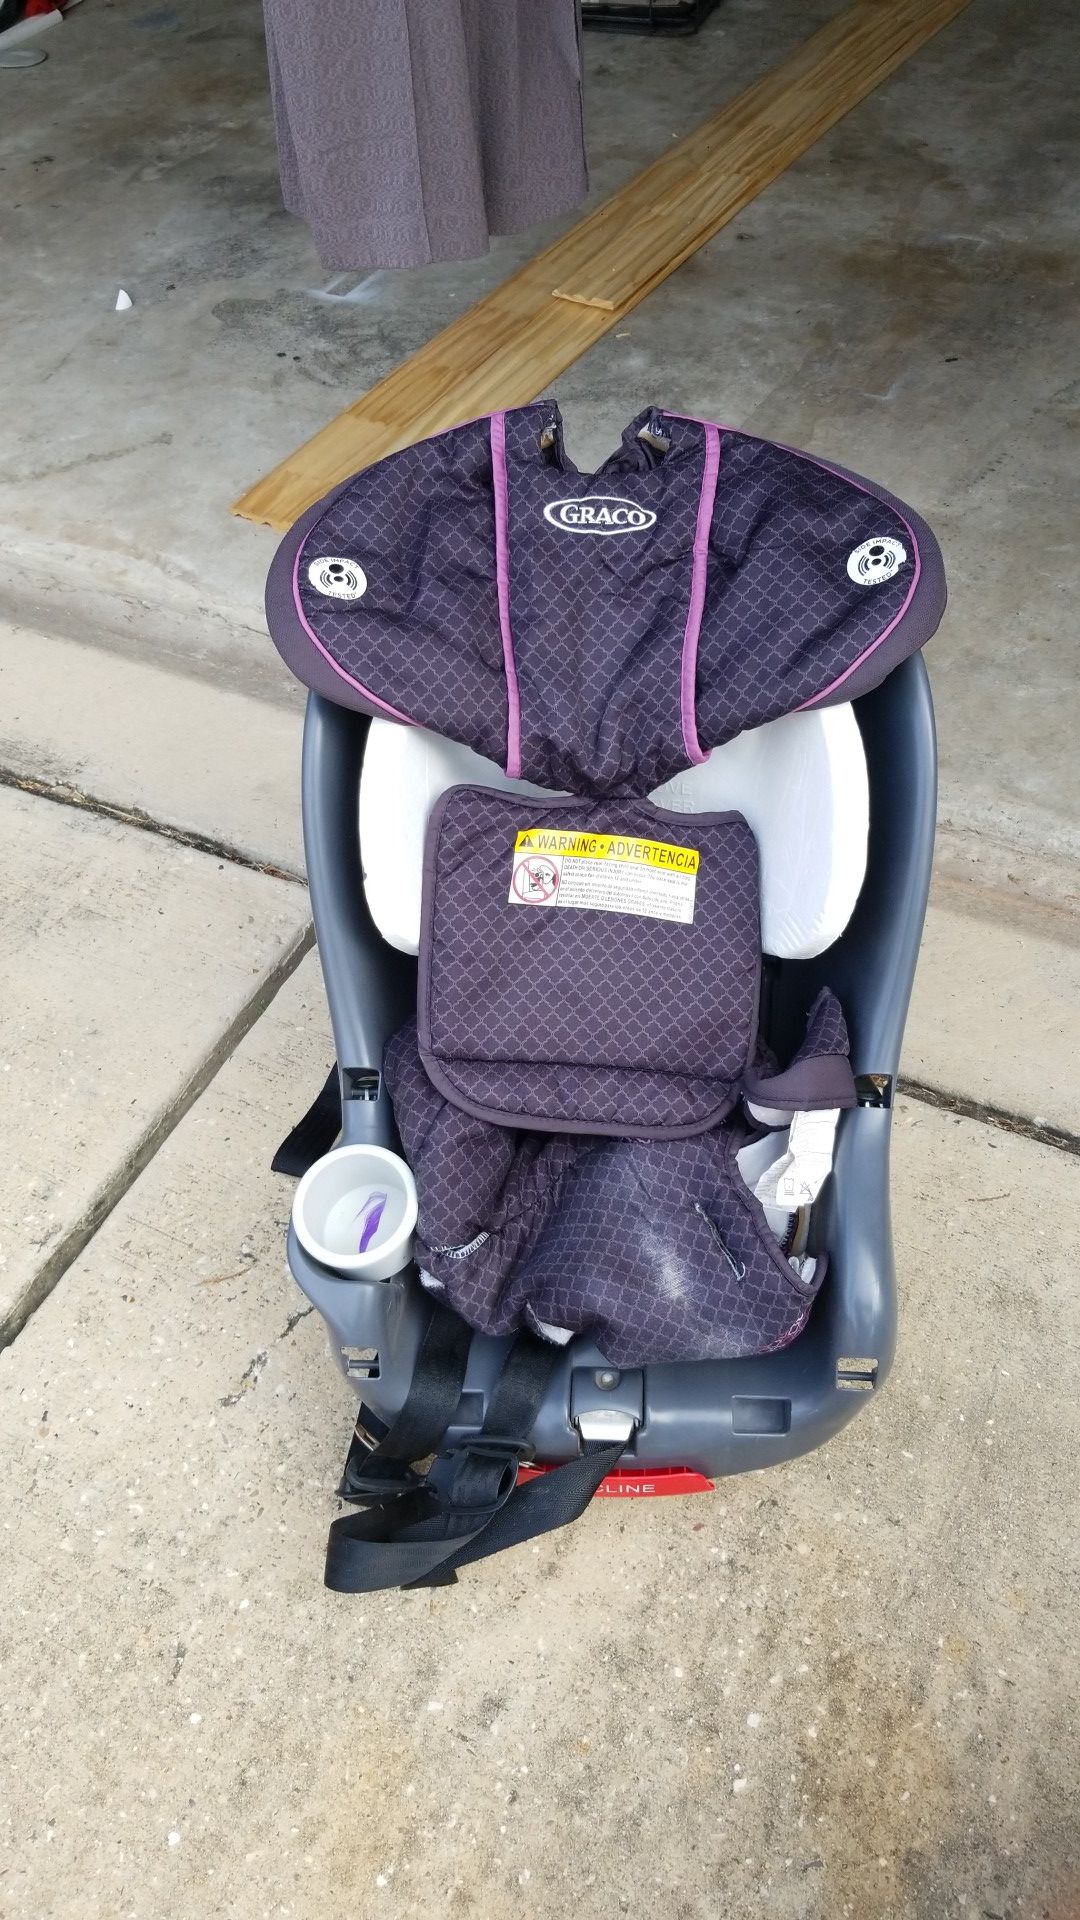 GRACO Car seat. Just washed